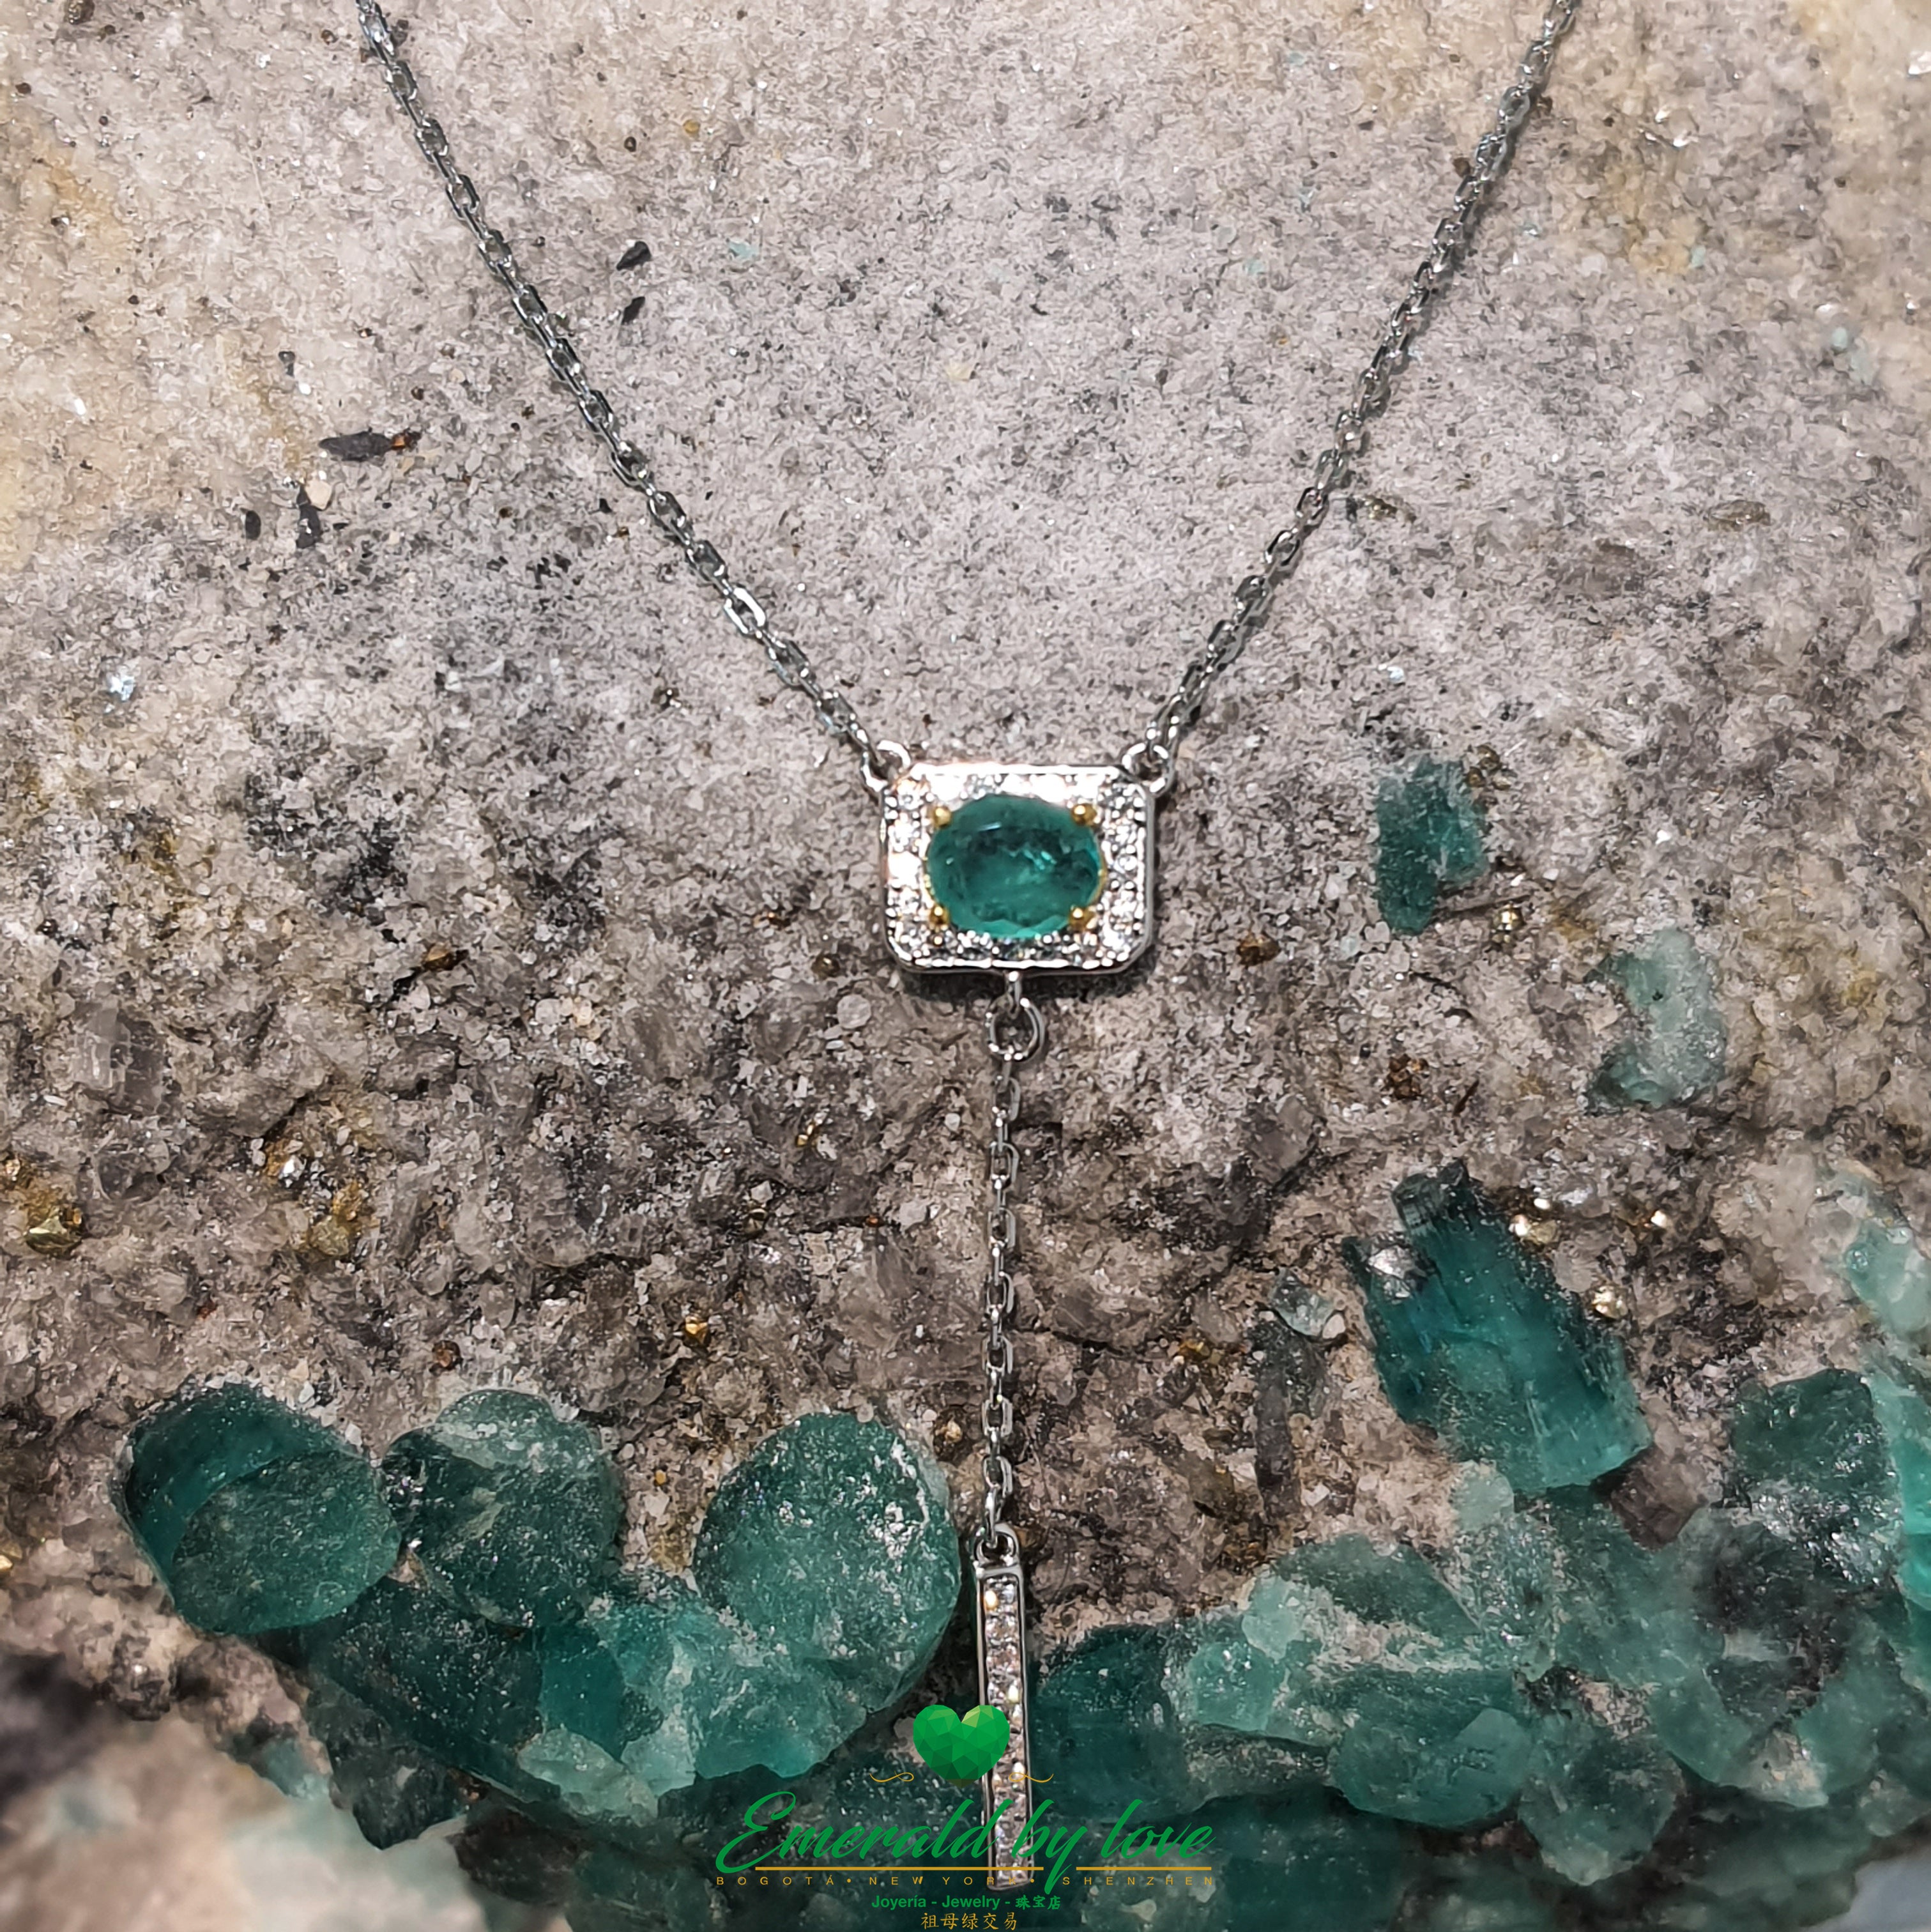 Rectangular Emerald Pendant with Hanging Cubic Zirconia Charm in Sterling Silver